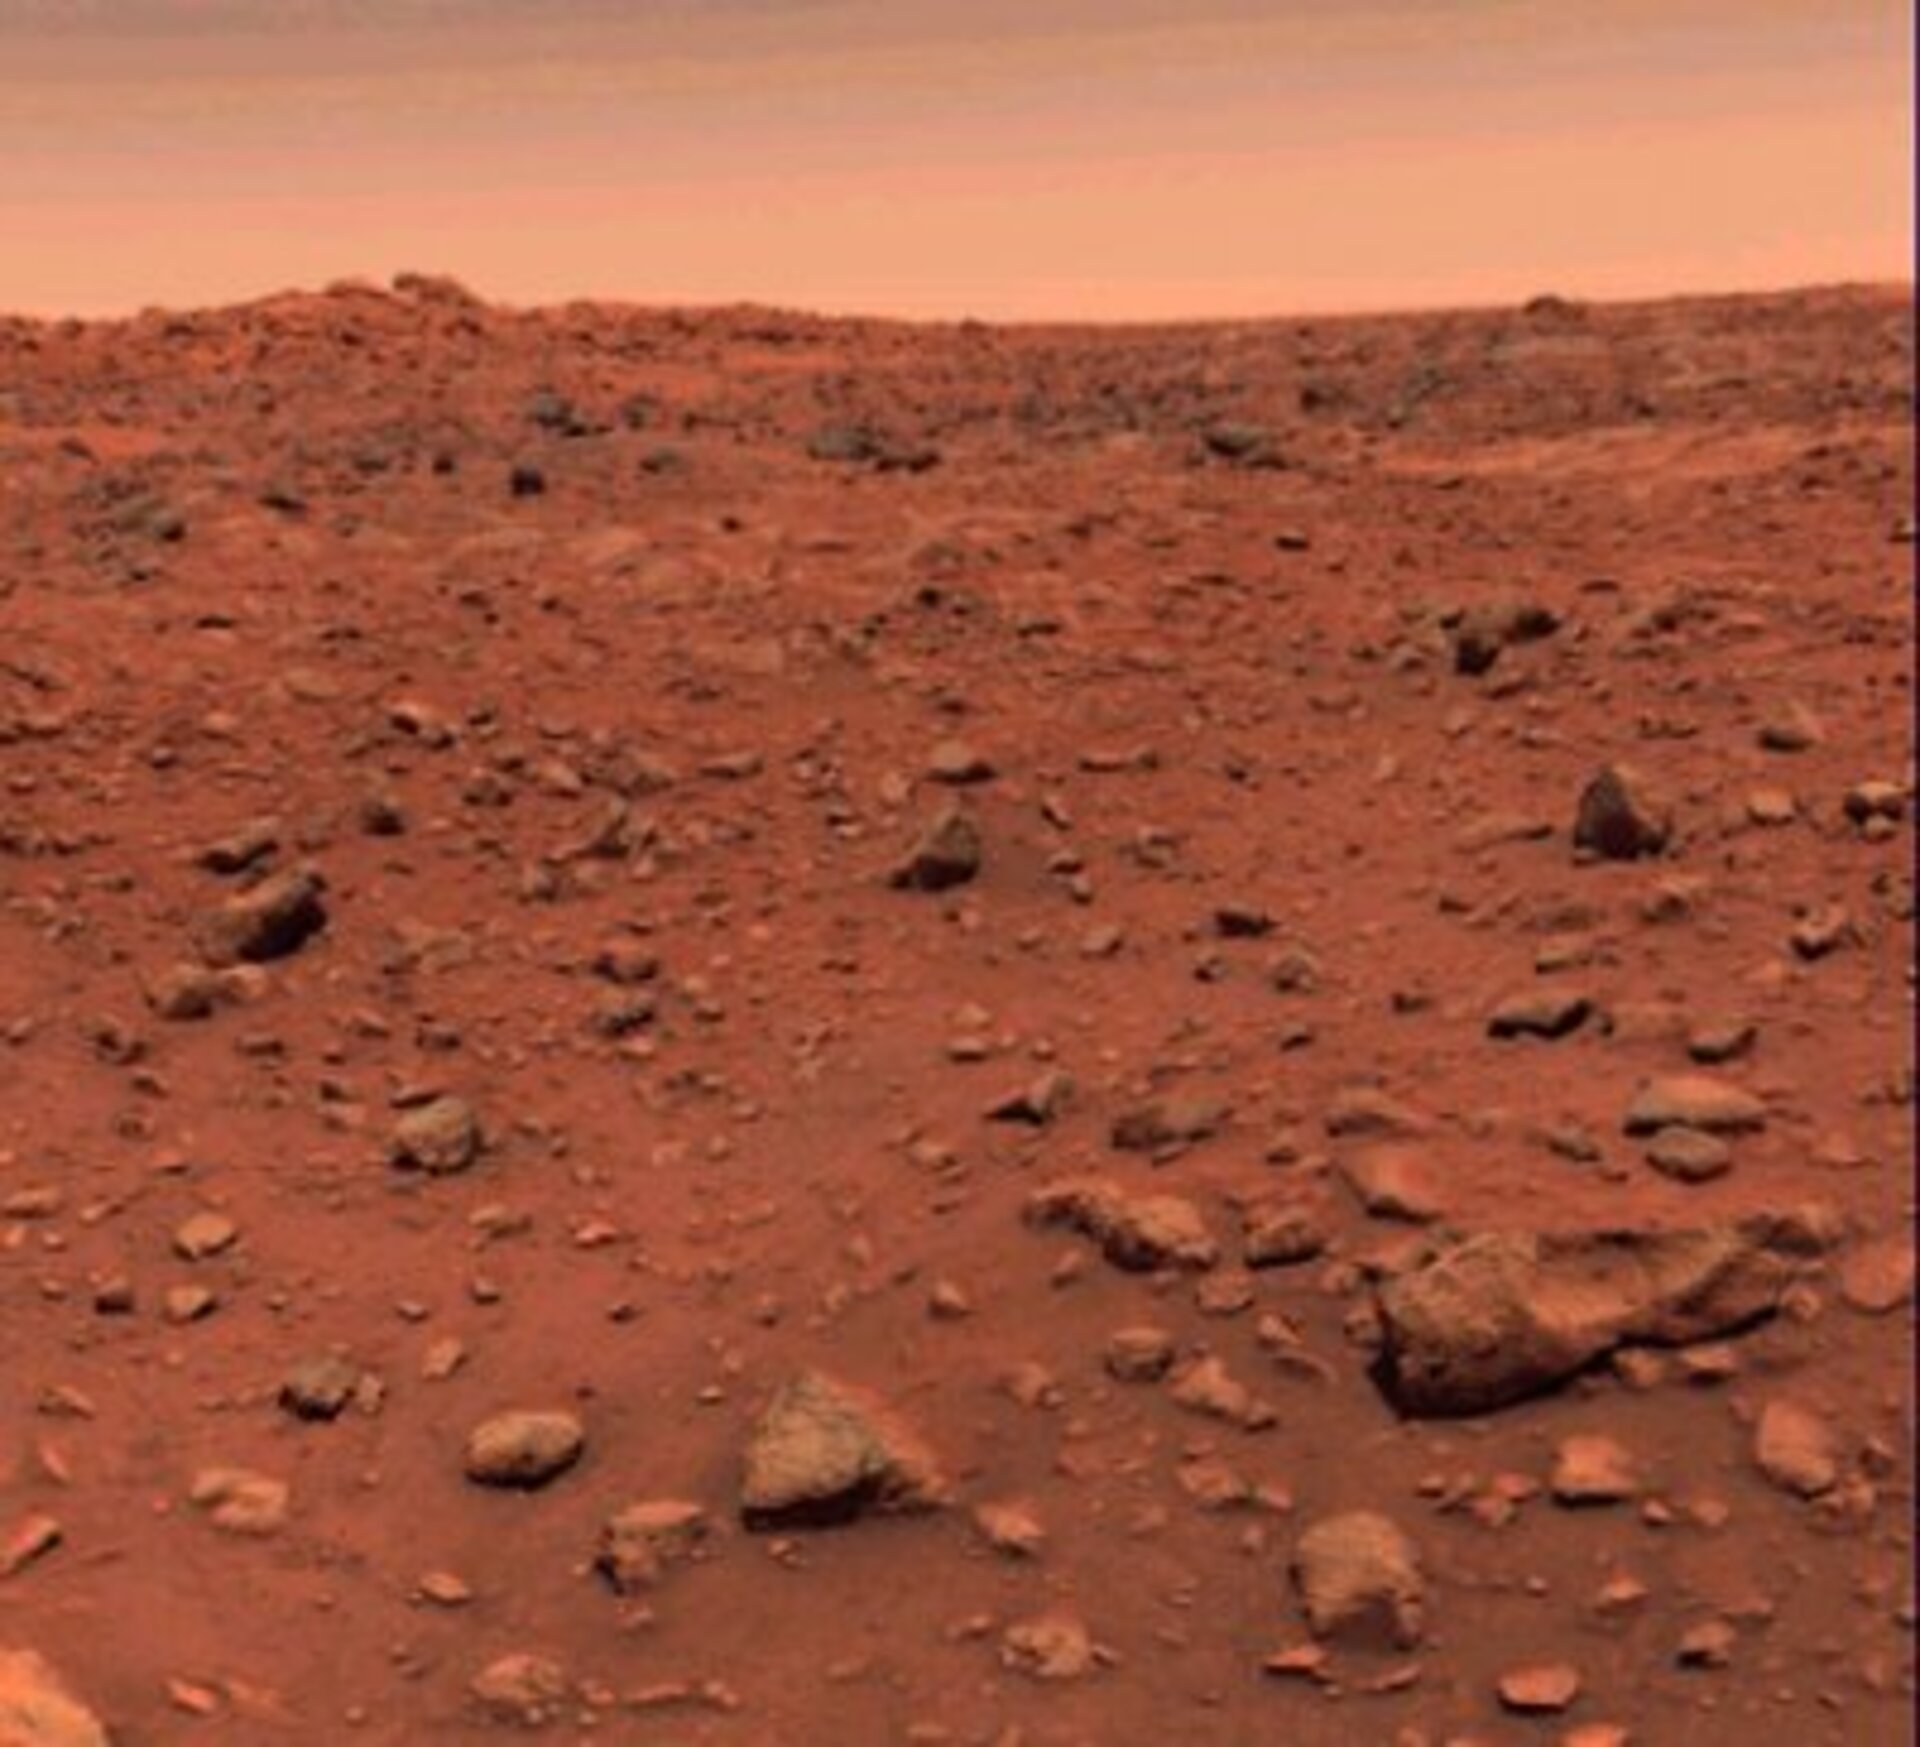 View of Mars from the Viking lander